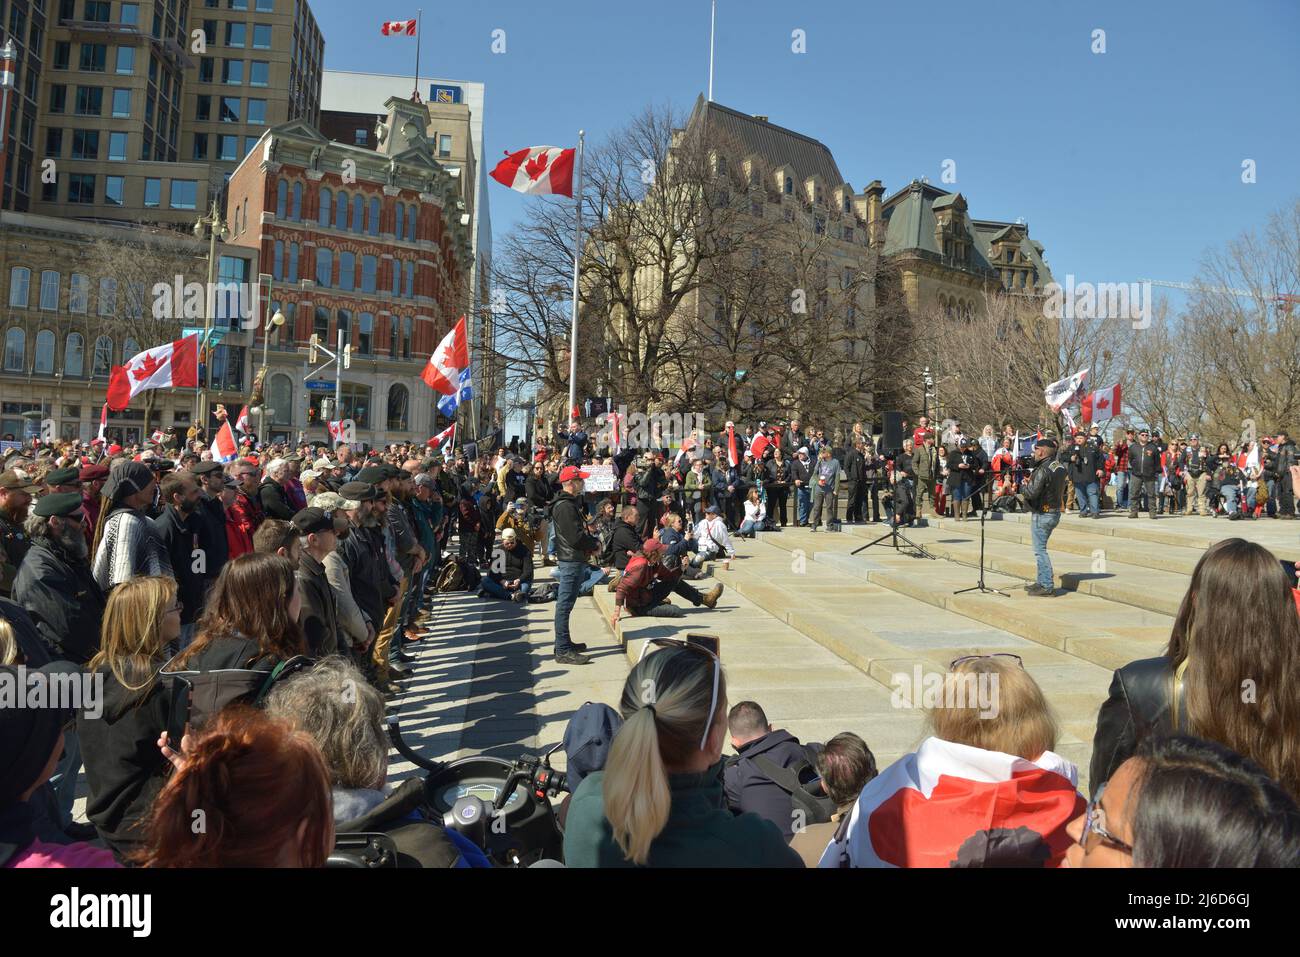 Saturday, April 30, 2022, Ottawa Canada. The “Live From The Shed”, “Freedom Fighters Canada” and “Veterans For Freedom” -- “Rolling Thunder Convoy” -- Memorial Event/ Protest.  Veterans from these groups gave impassioned speeches and laid at a ceremonial wreath at the foot of The National War Memorial before a sizeable crowd, this followed by an indeed, thunderous parade of motorcycles doing a pass-by on Elgin Street just south of The Memorial. Many Ottawa and Ontario Provincial Police Services Members were also on hand to protect public safety. Stock Photo